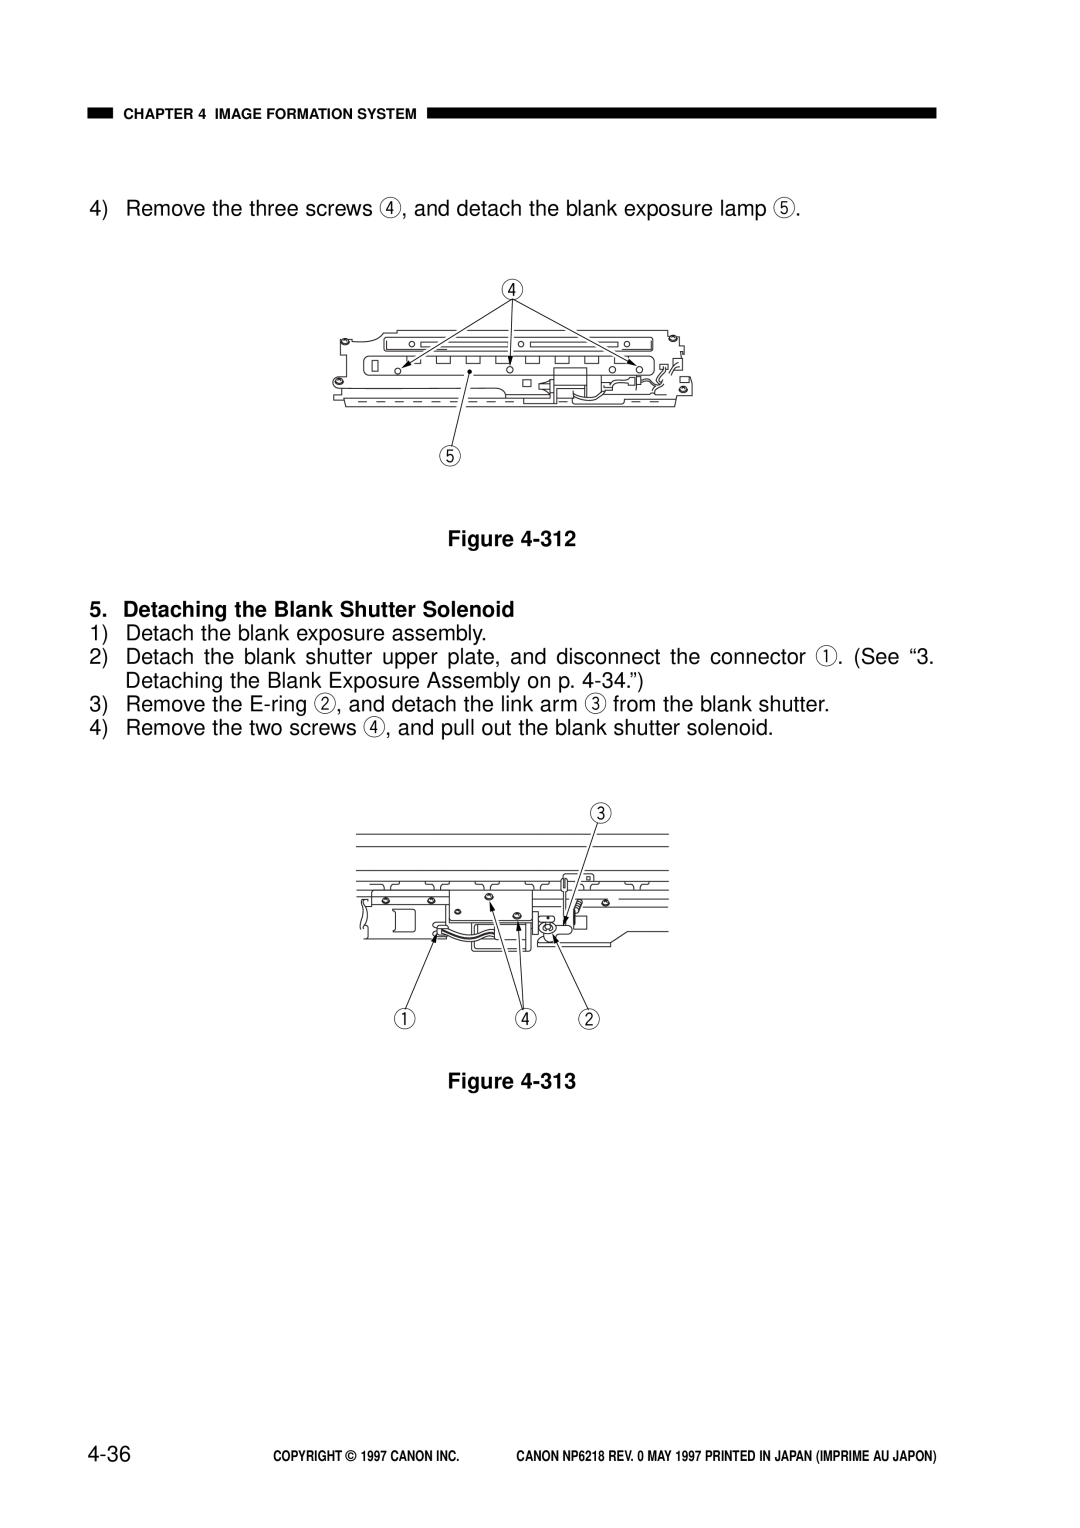 Canon NP6218, FY8-13EX-000 service manual Detaching the Blank Shutter Solenoid, 4-36 